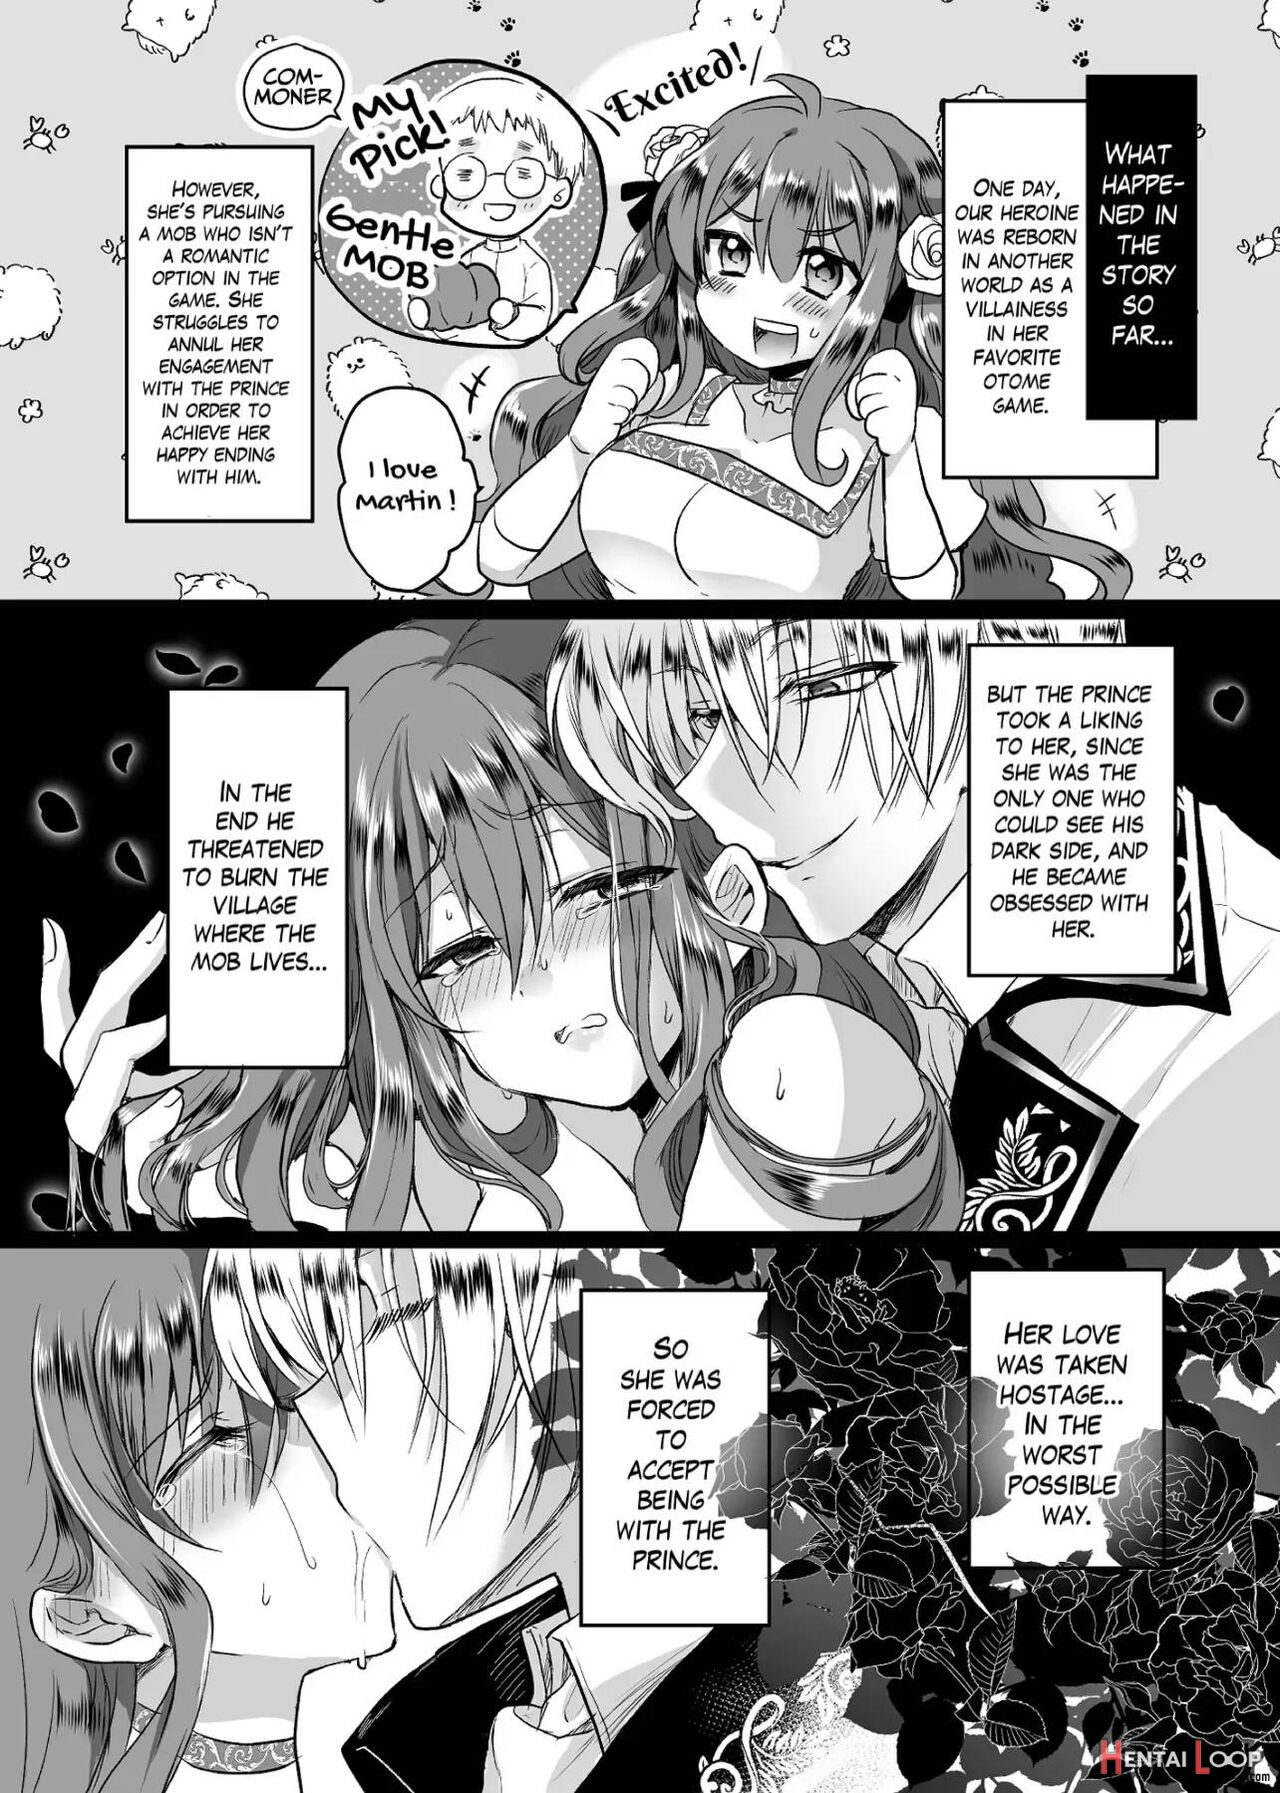  jk's Tragic Isekai Reincarnation As The Villainess ~but My Precious Side Character!~ 2 page 3